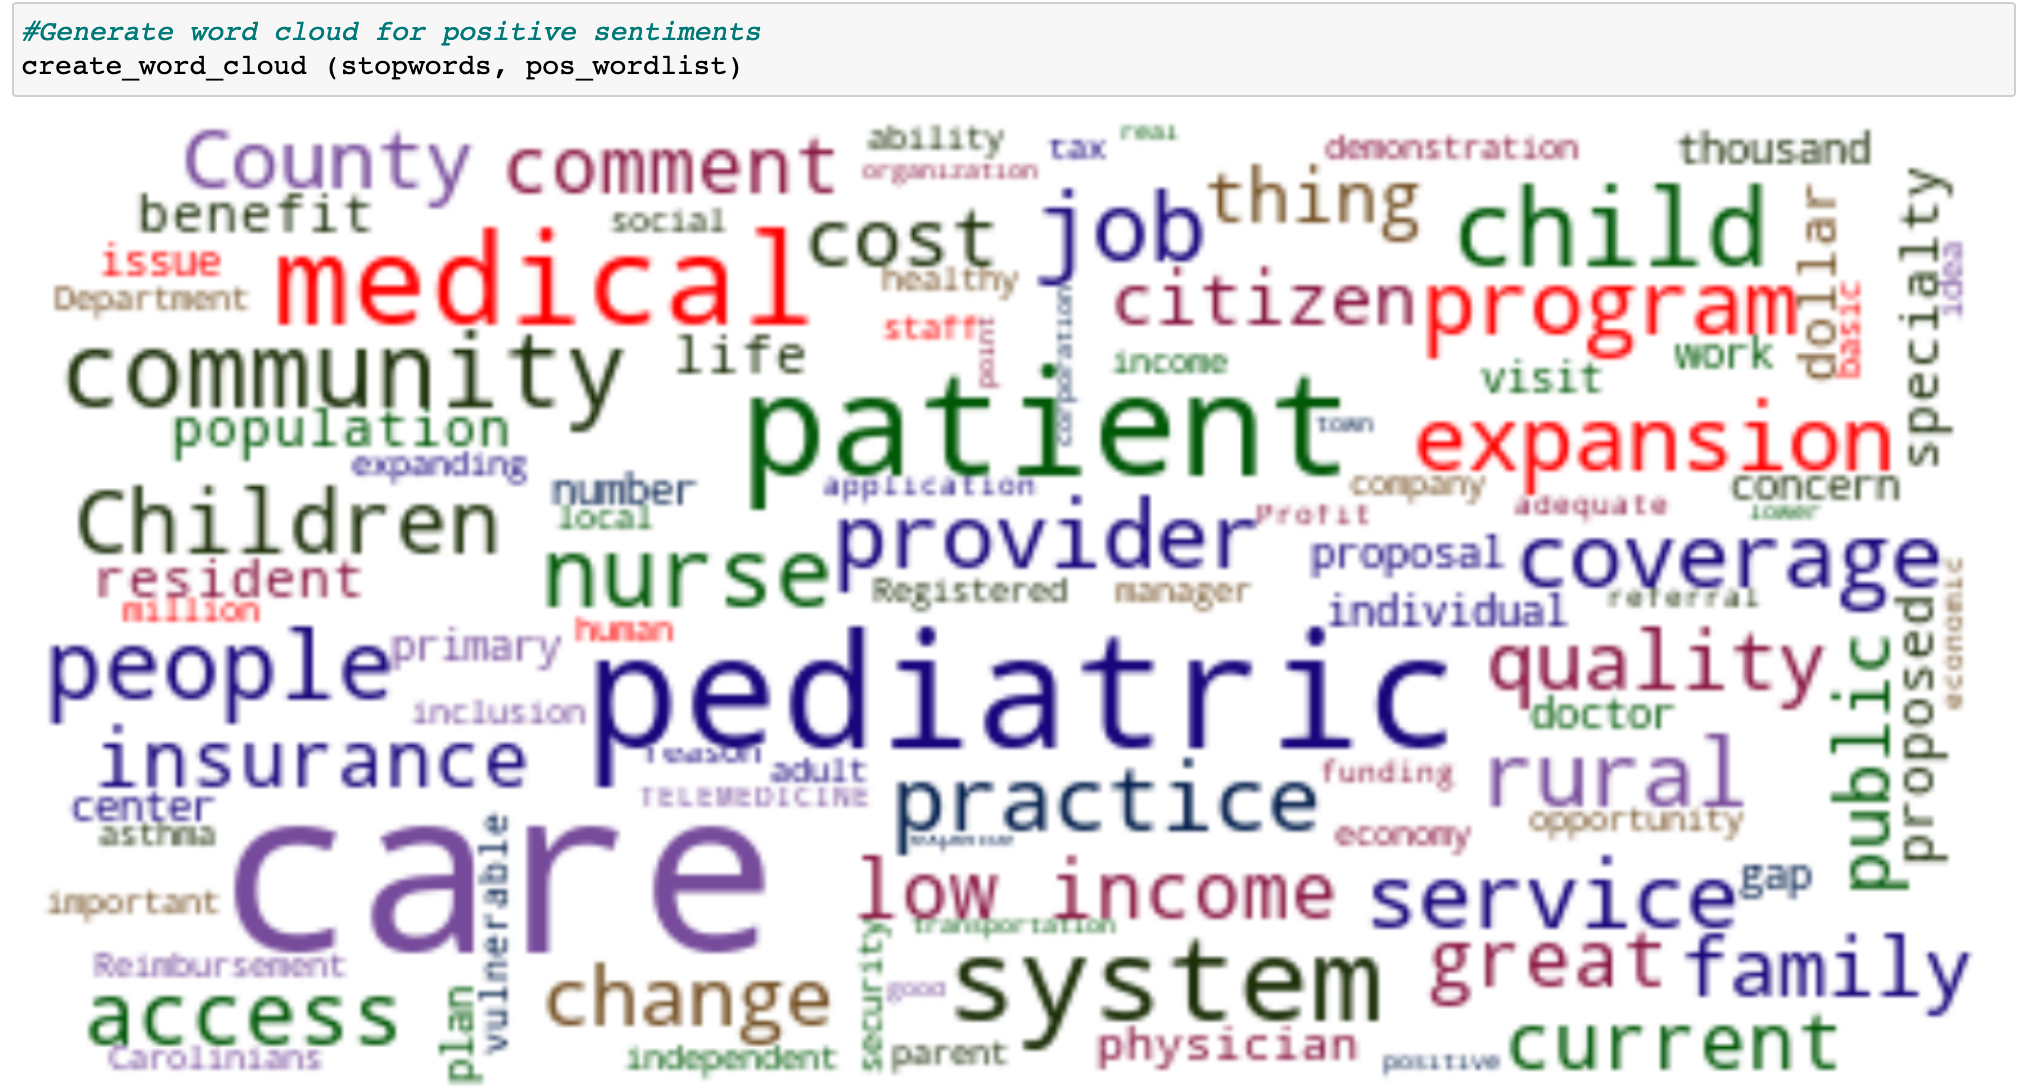 Word cloud image of the positive sentiments